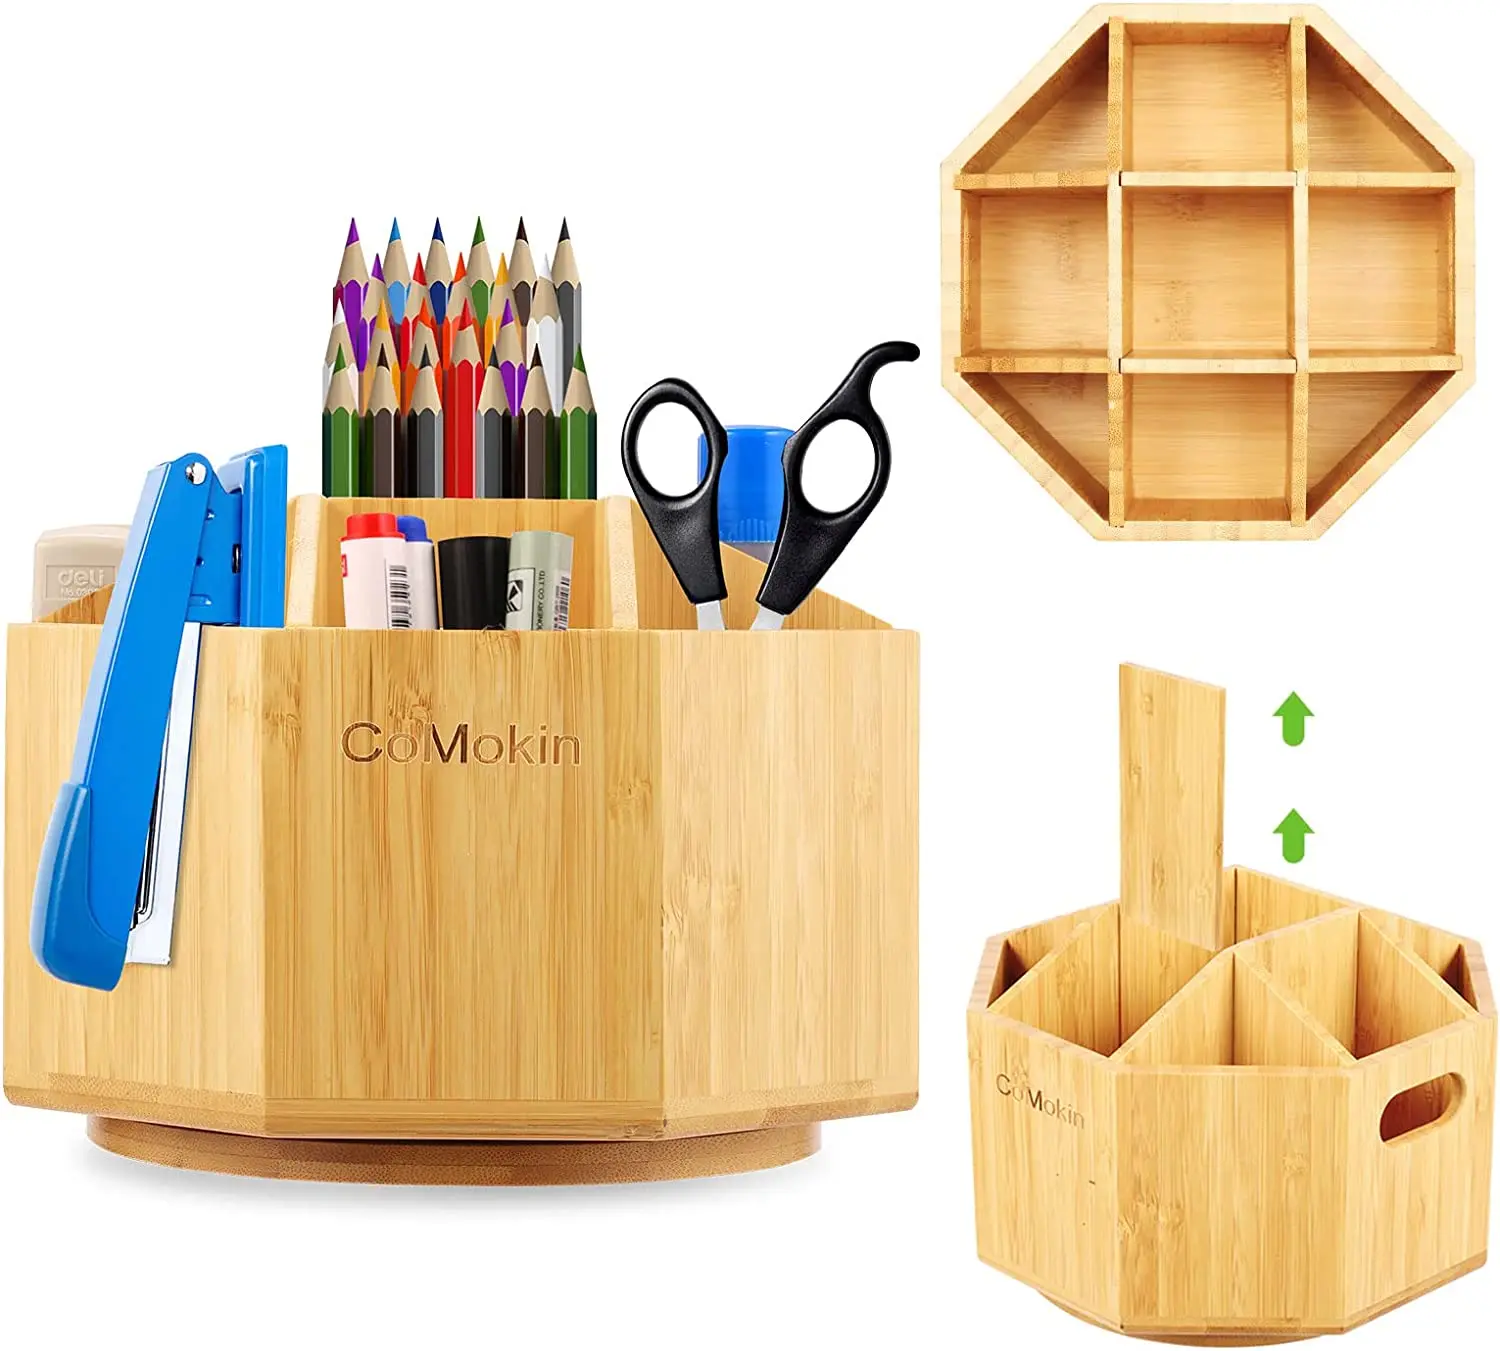 Bamboo Art Supply Organizer, Back to School Supplies, Hold 350+ Pencils,  Rotating School Supplies Holder for Pen, Colored Pencil, Art Brushes,  Desktop